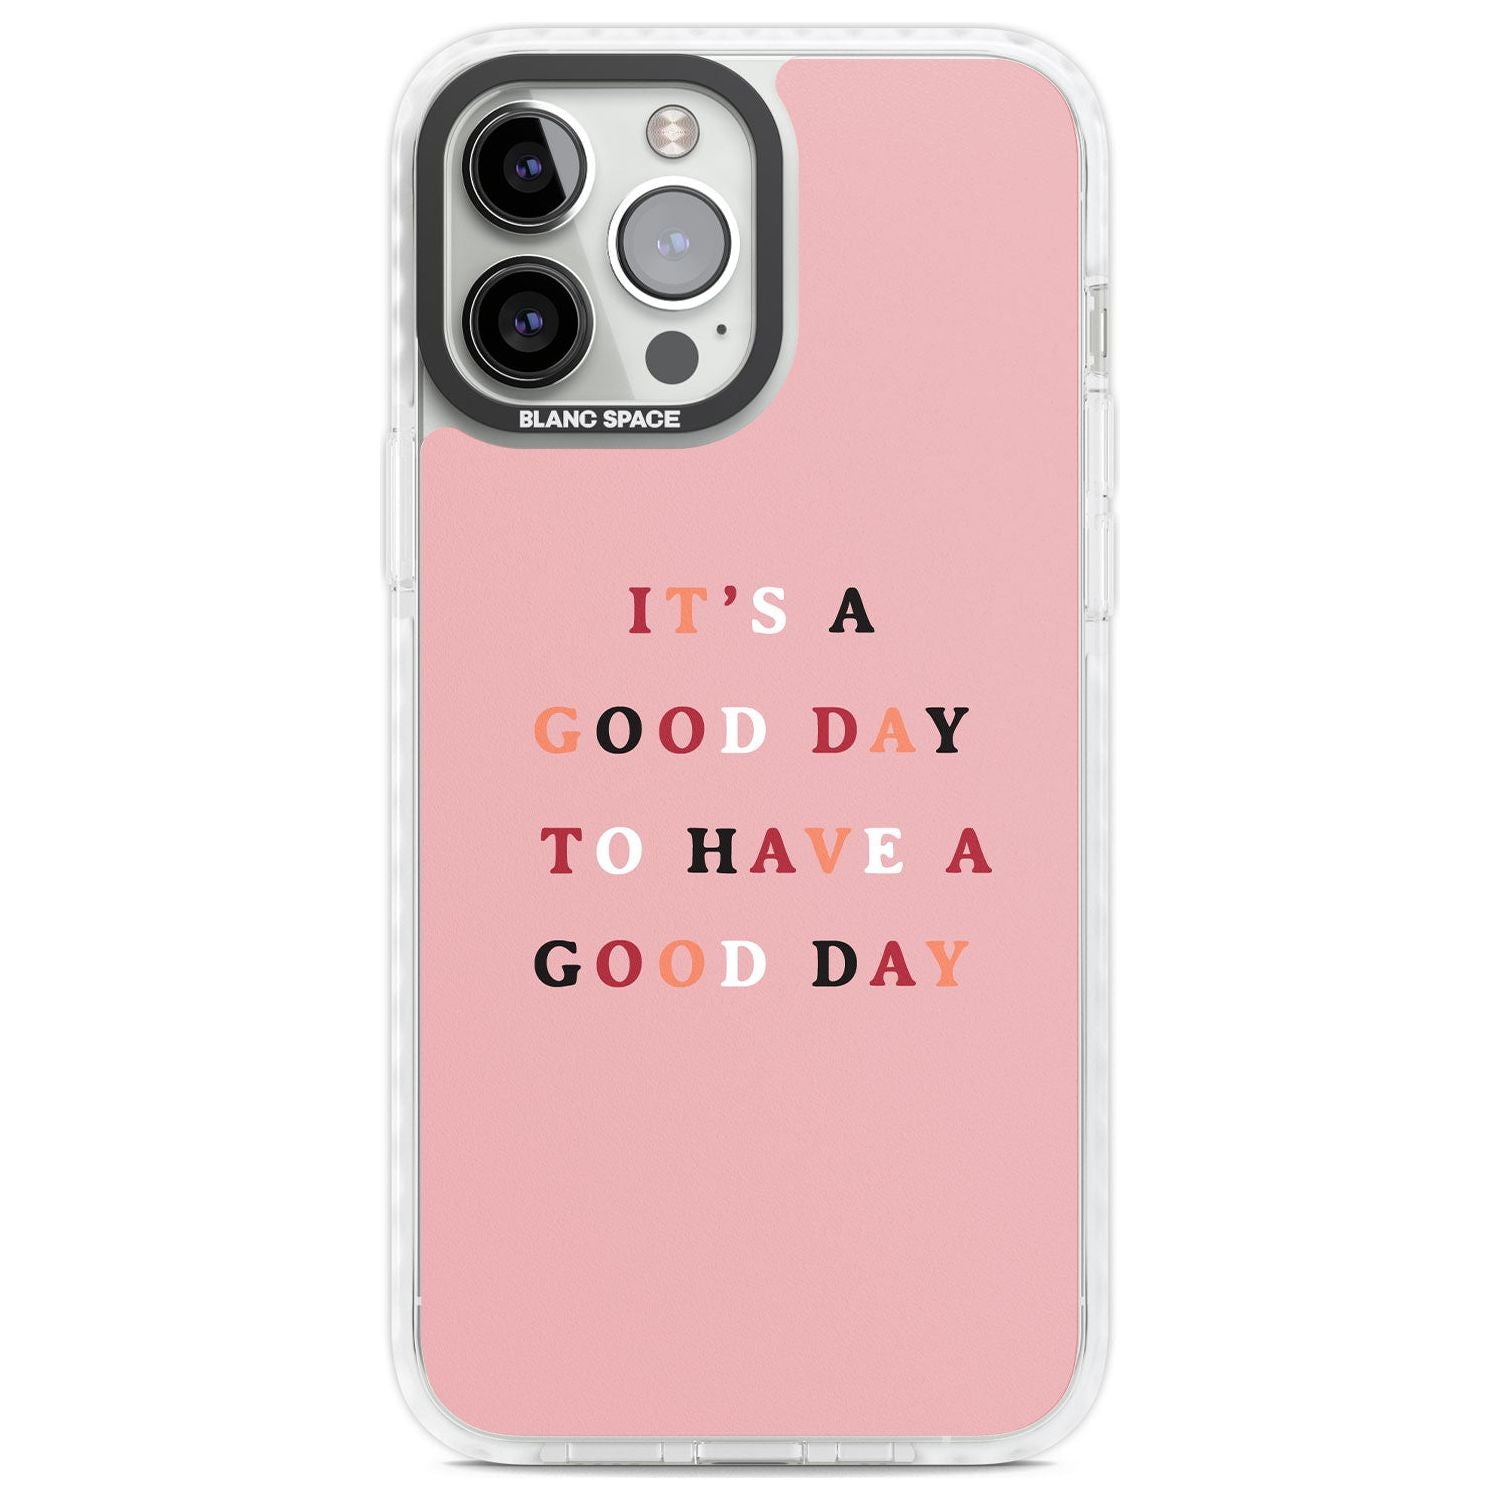 It's a good day to have a good day Phone Case iPhone 13 Pro Max / Impact Case,iPhone 14 Pro Max / Impact Case Blanc Space